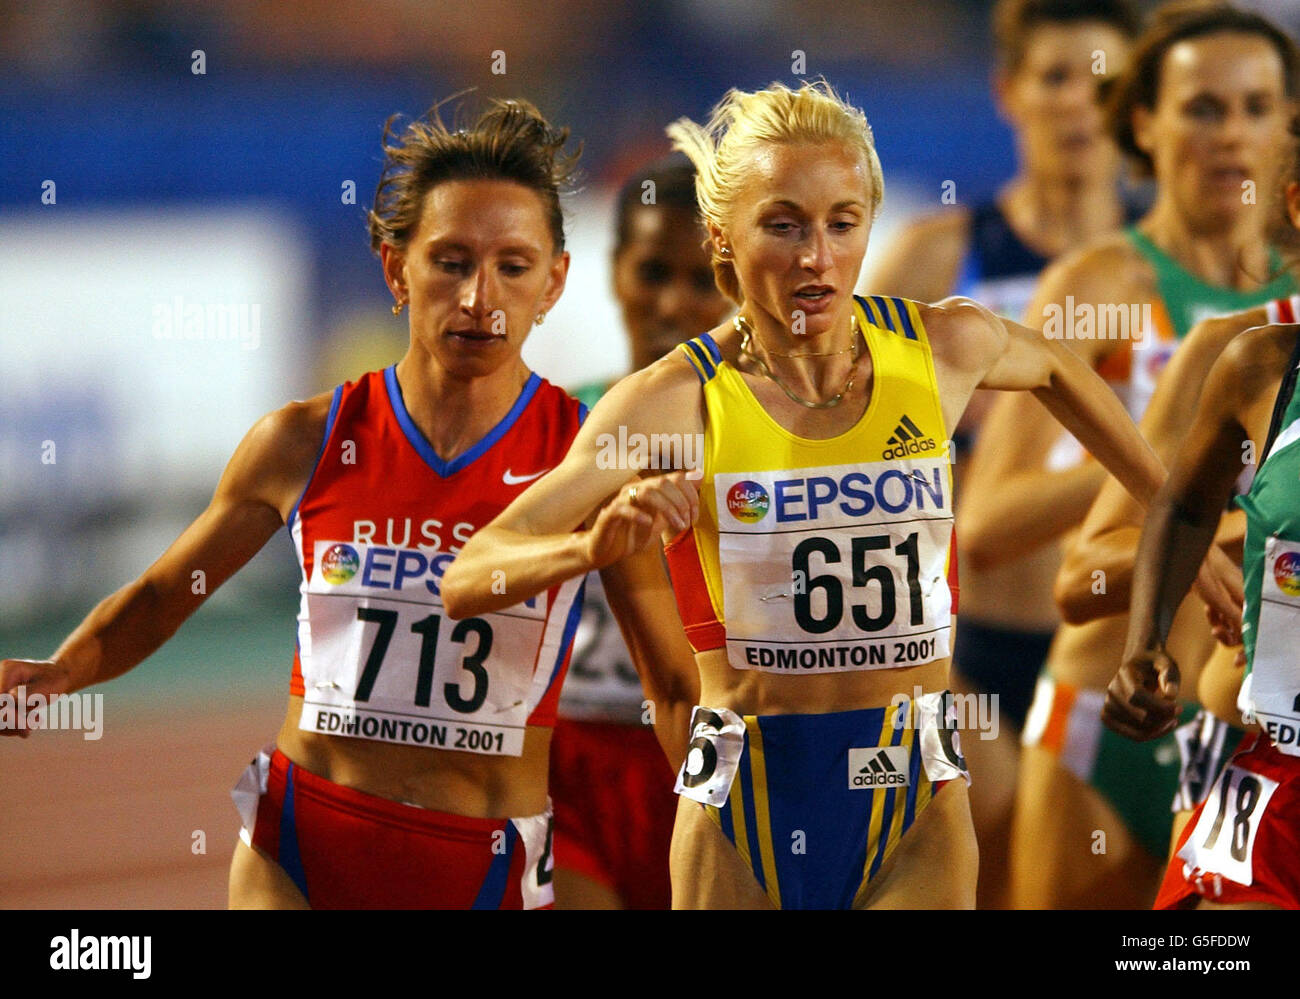 Romanian Gabriela Szabo (R) and Russian Olga Yegorova collide during their heat of the women's 5000m at the IAAF World Championships in Edmonton, Canada. Stock Photo